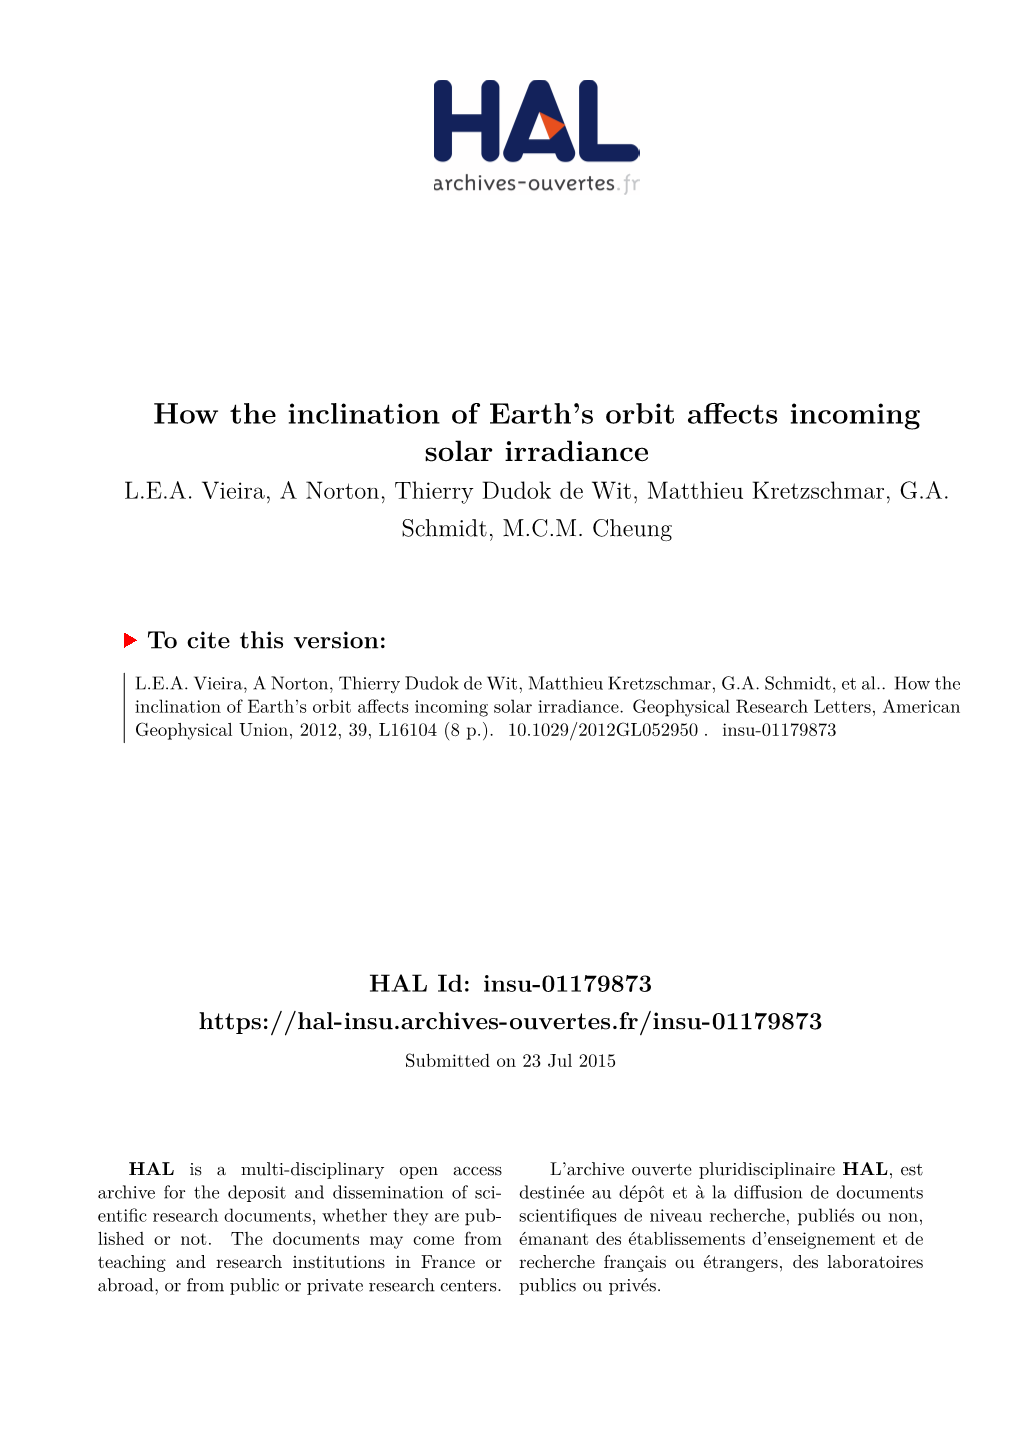 How the Inclination of Earth's Orbit Affects Incoming Solar Irradiance